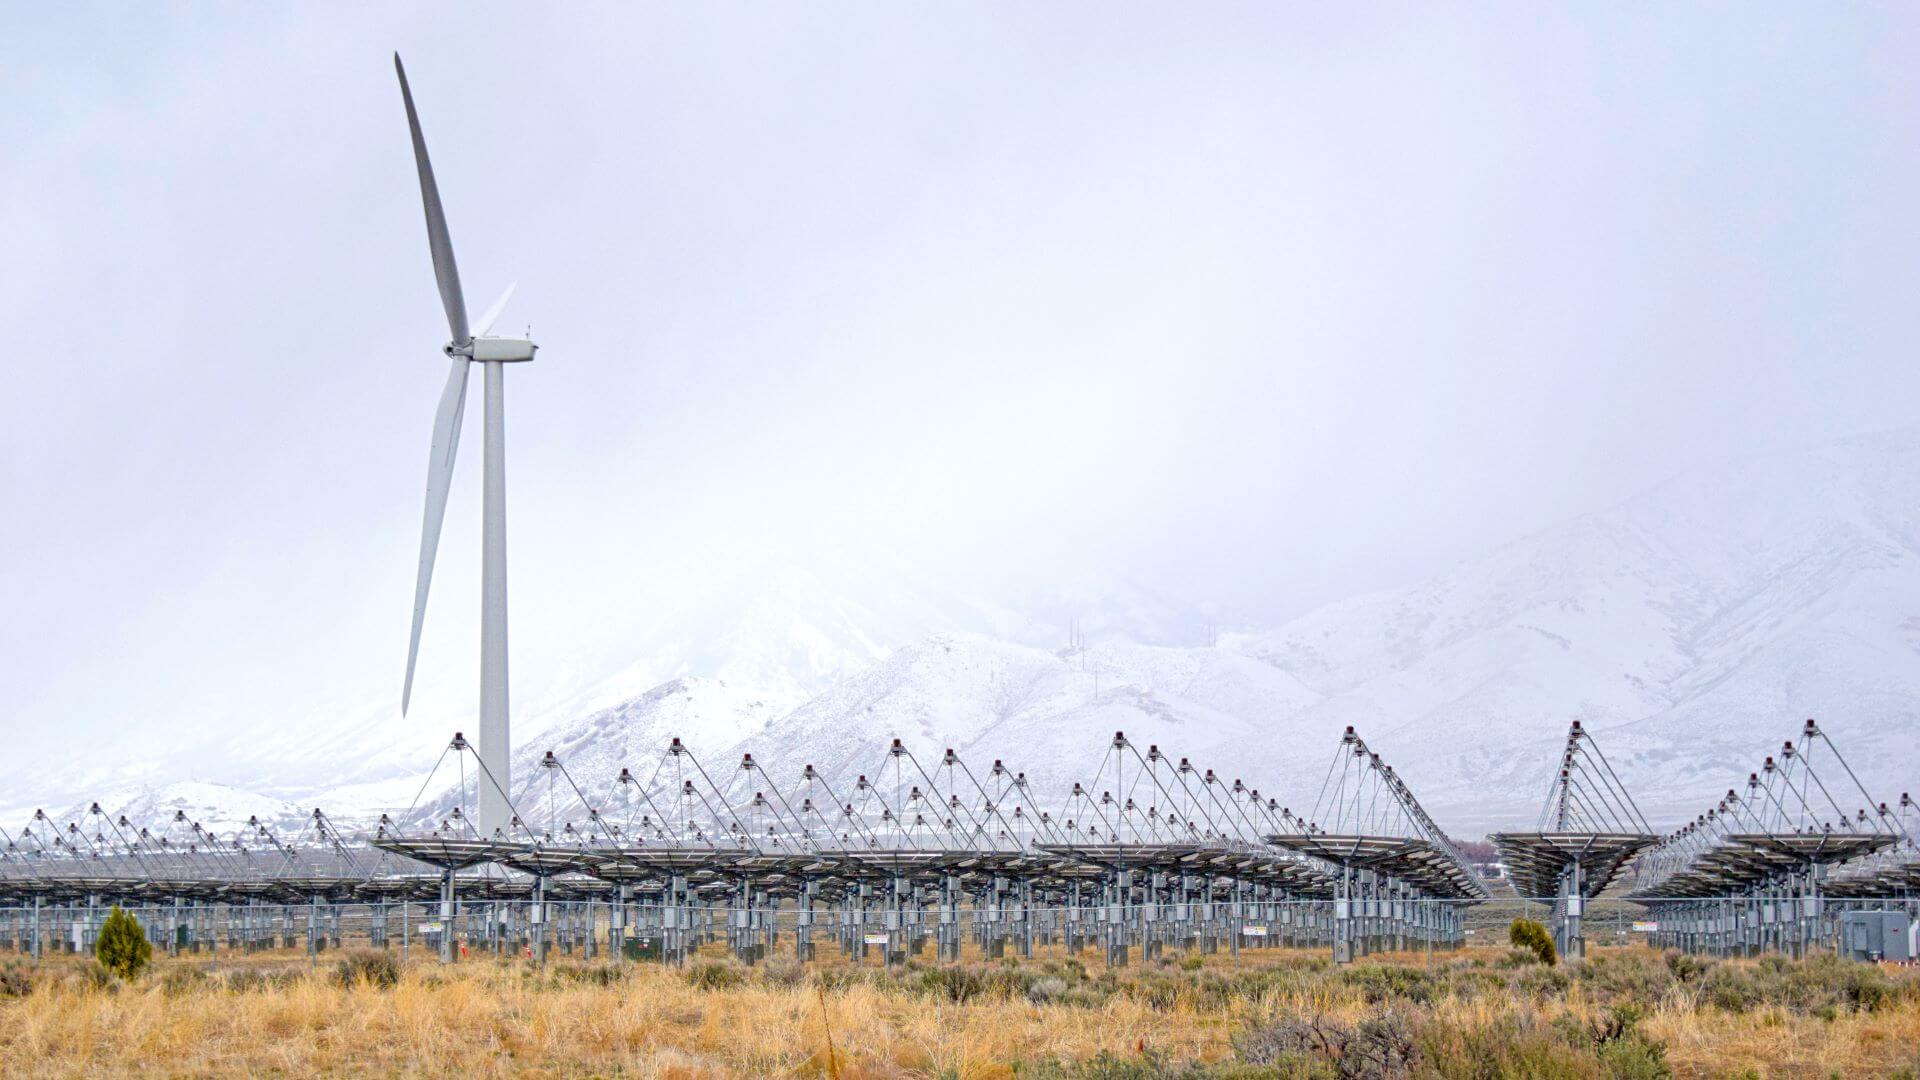 solar wind farm with a wind turbine in foreground and mountains on horizon